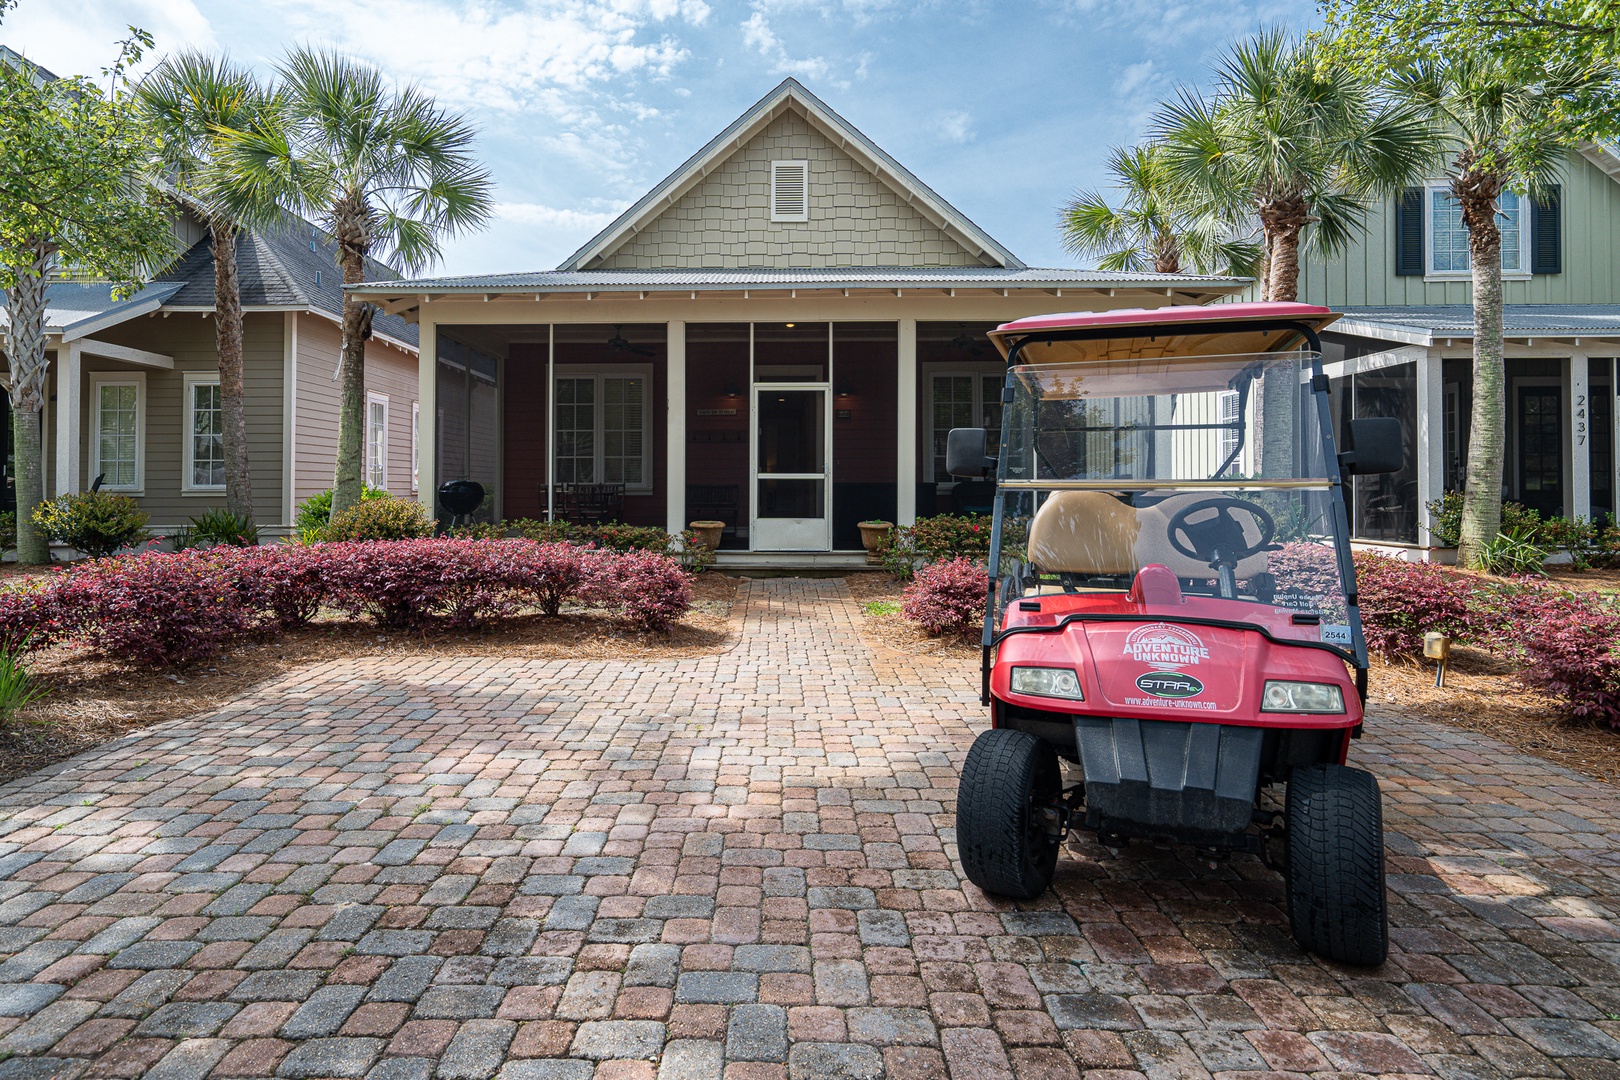 Revel in the convenience of the golf cart